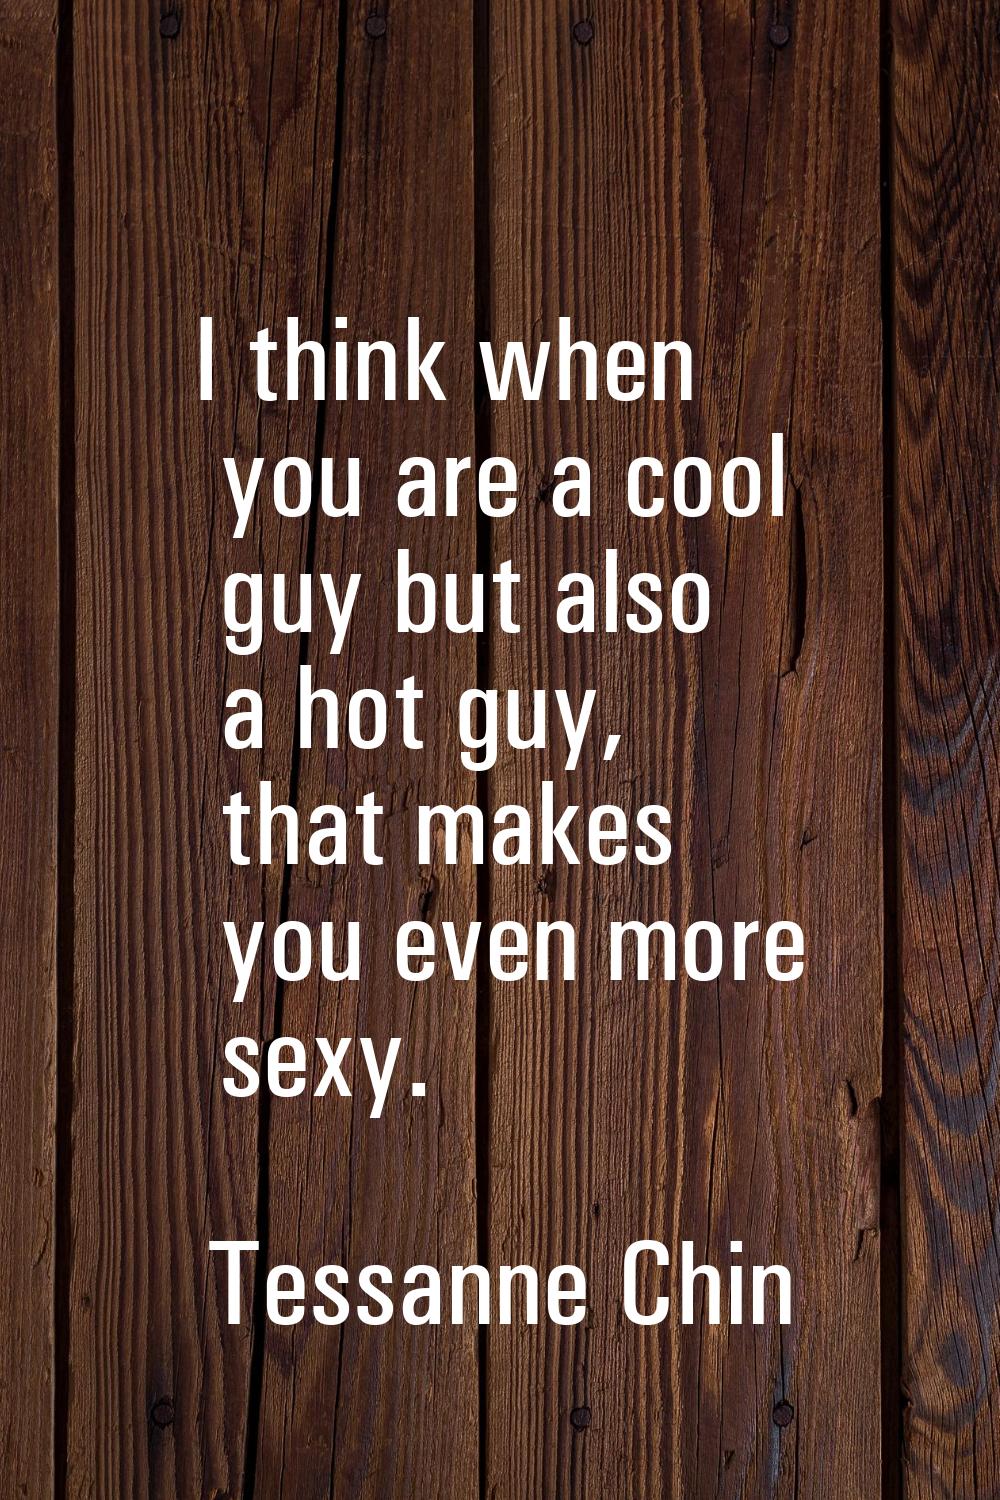 I think when you are a cool guy but also a hot guy, that makes you even more sexy.